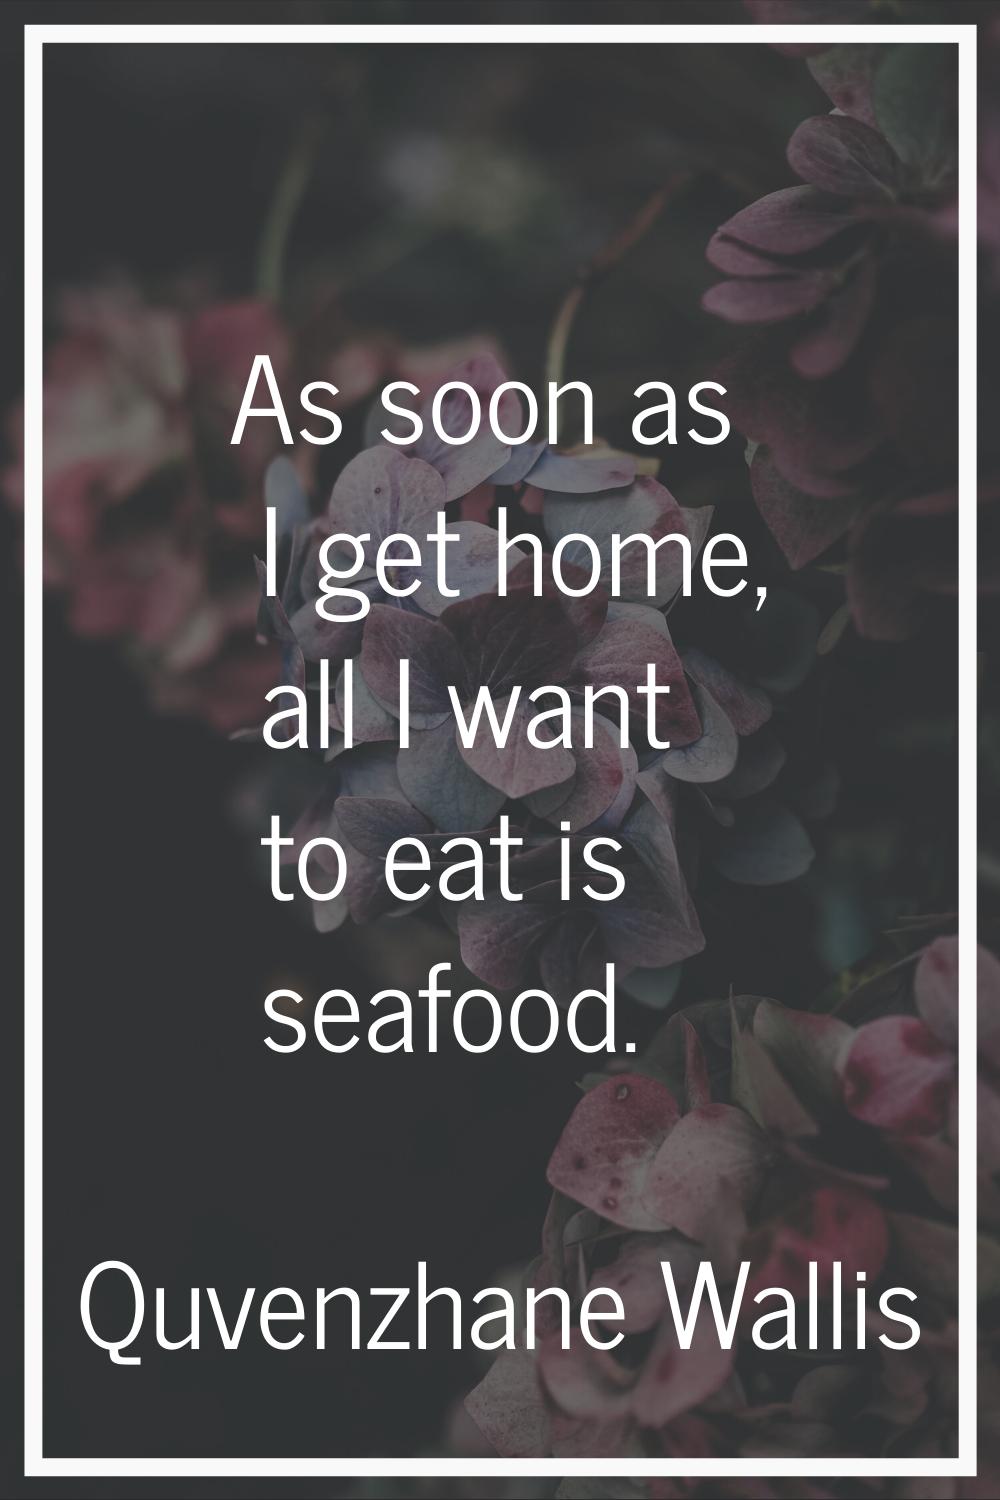 As soon as I get home, all I want to eat is seafood.